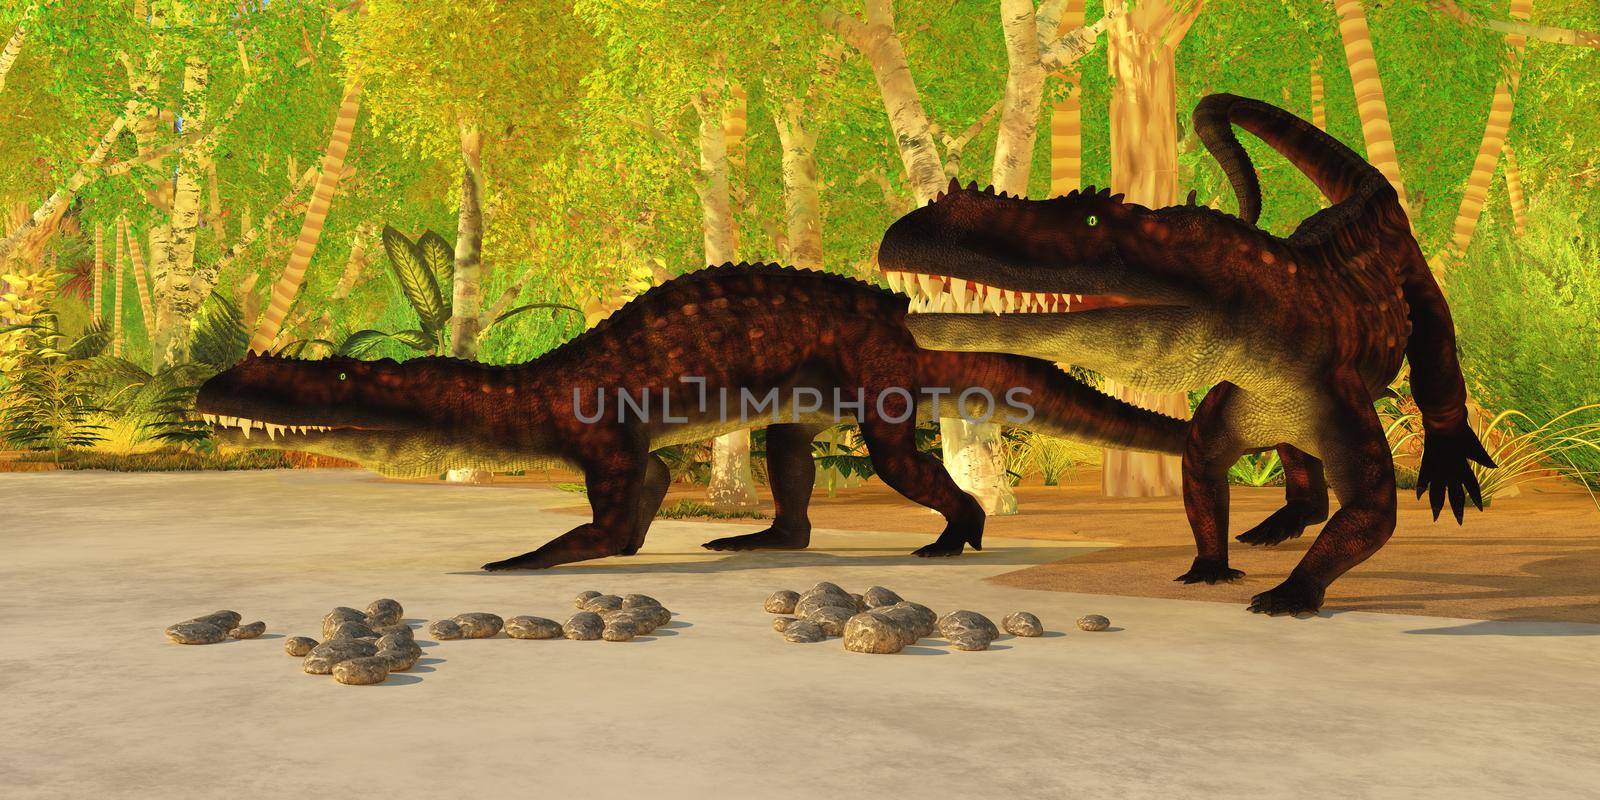 Prestosuchus was an archosaur predator much like the crocodile of today. It lived during the Triassic Period of Brazil.